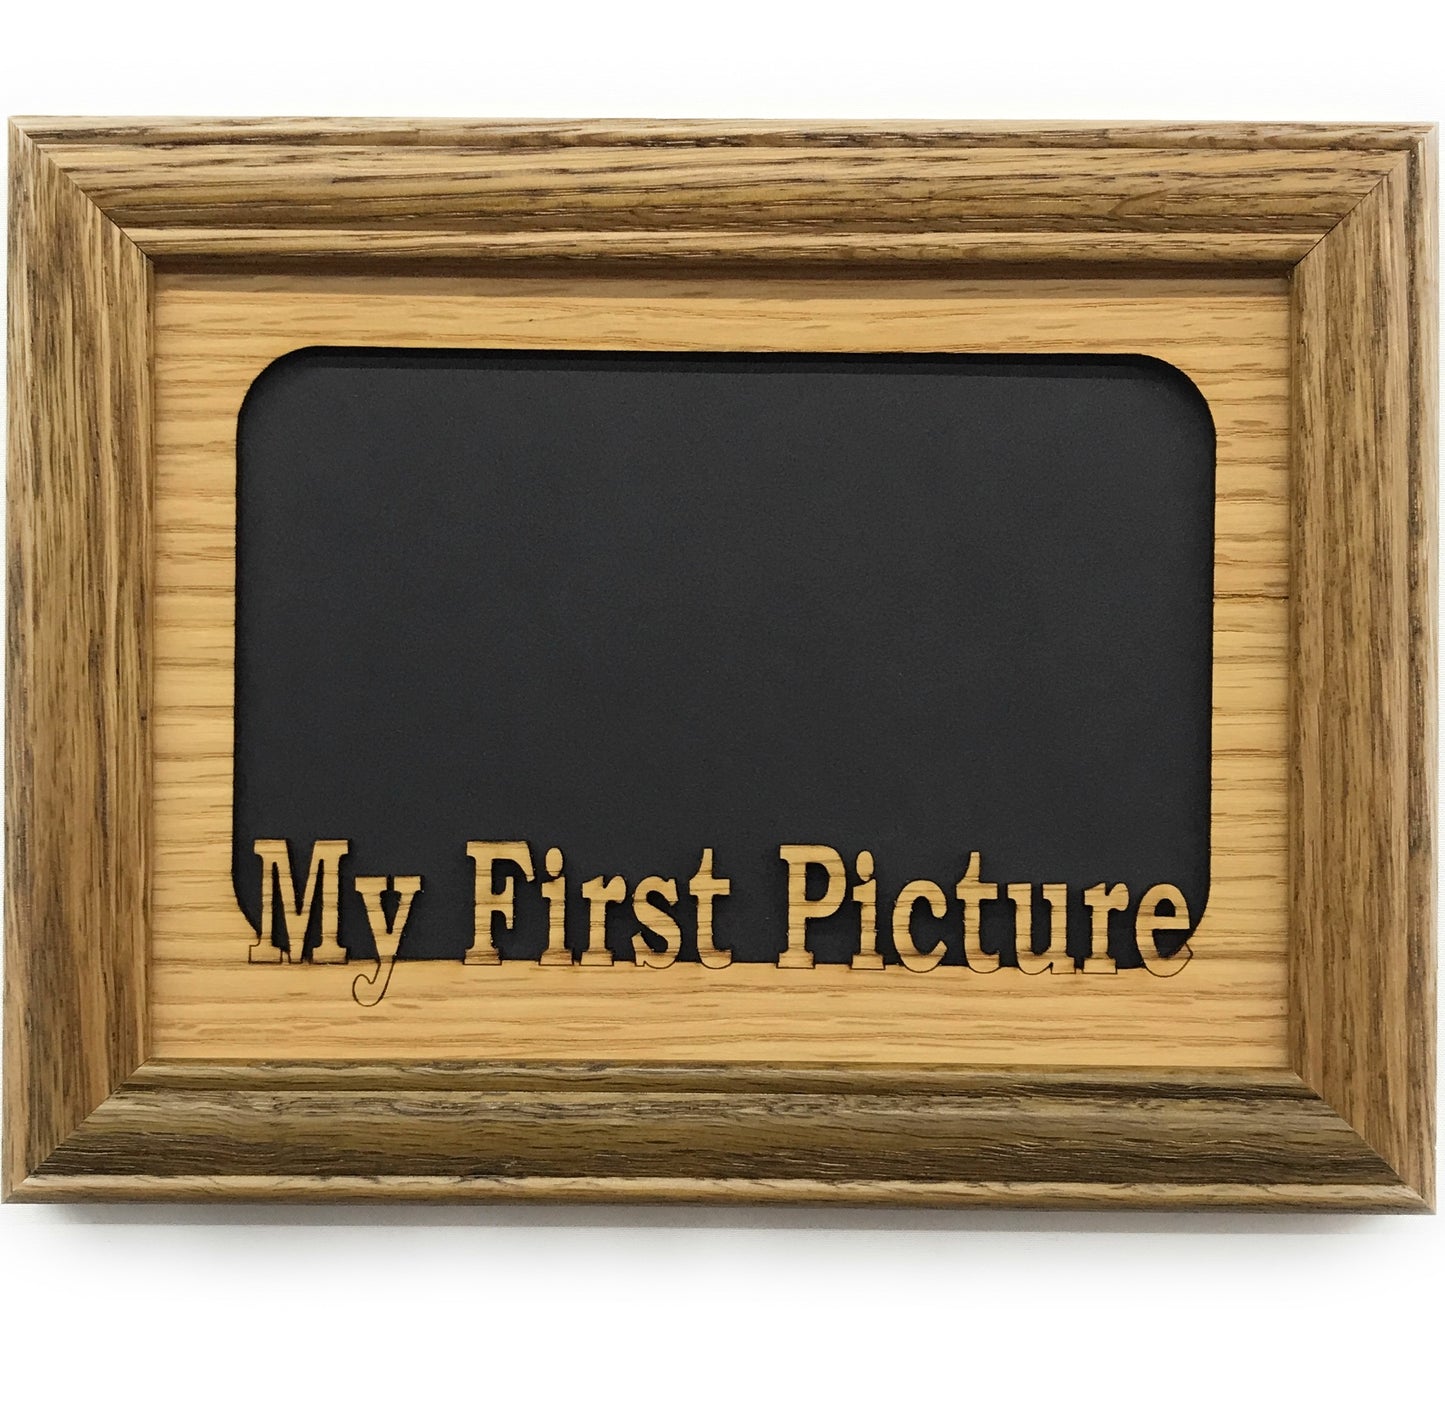 My First Picture Frame - 5x7 Frame Hold 4x6 Photo